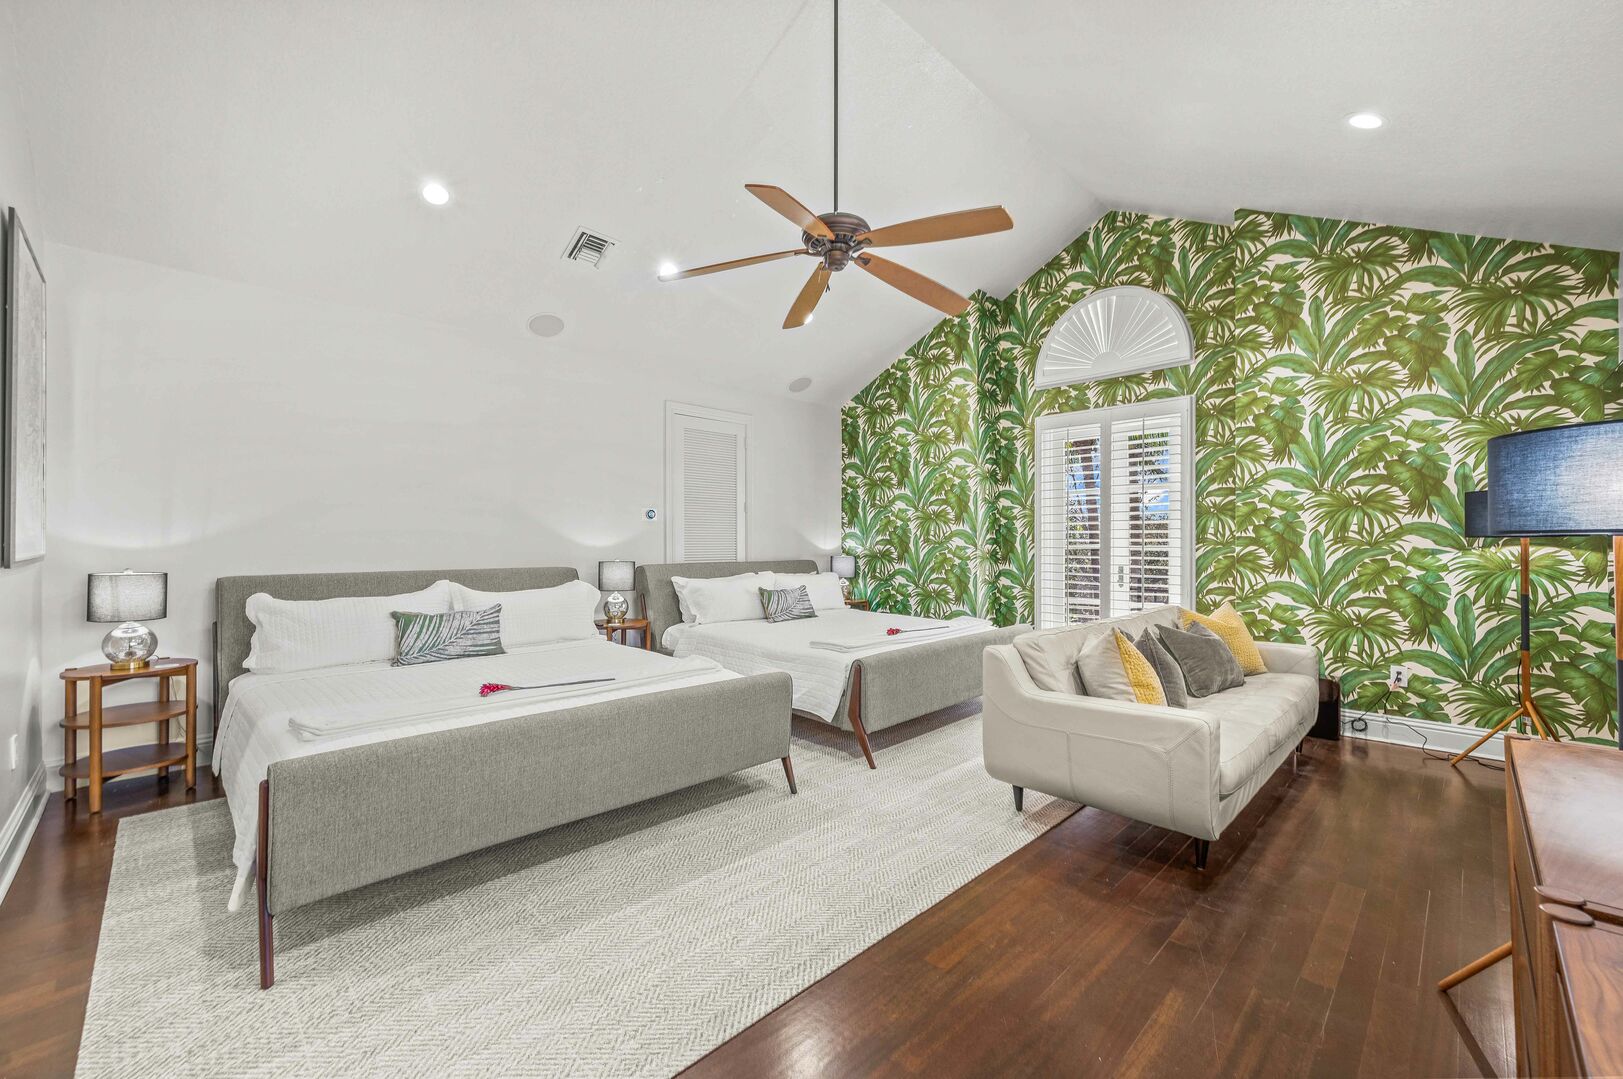 The fifth bedroom is privately placed above the garage space and large enough for an entire family or group of teens. The bedroom includes 2 king beds.